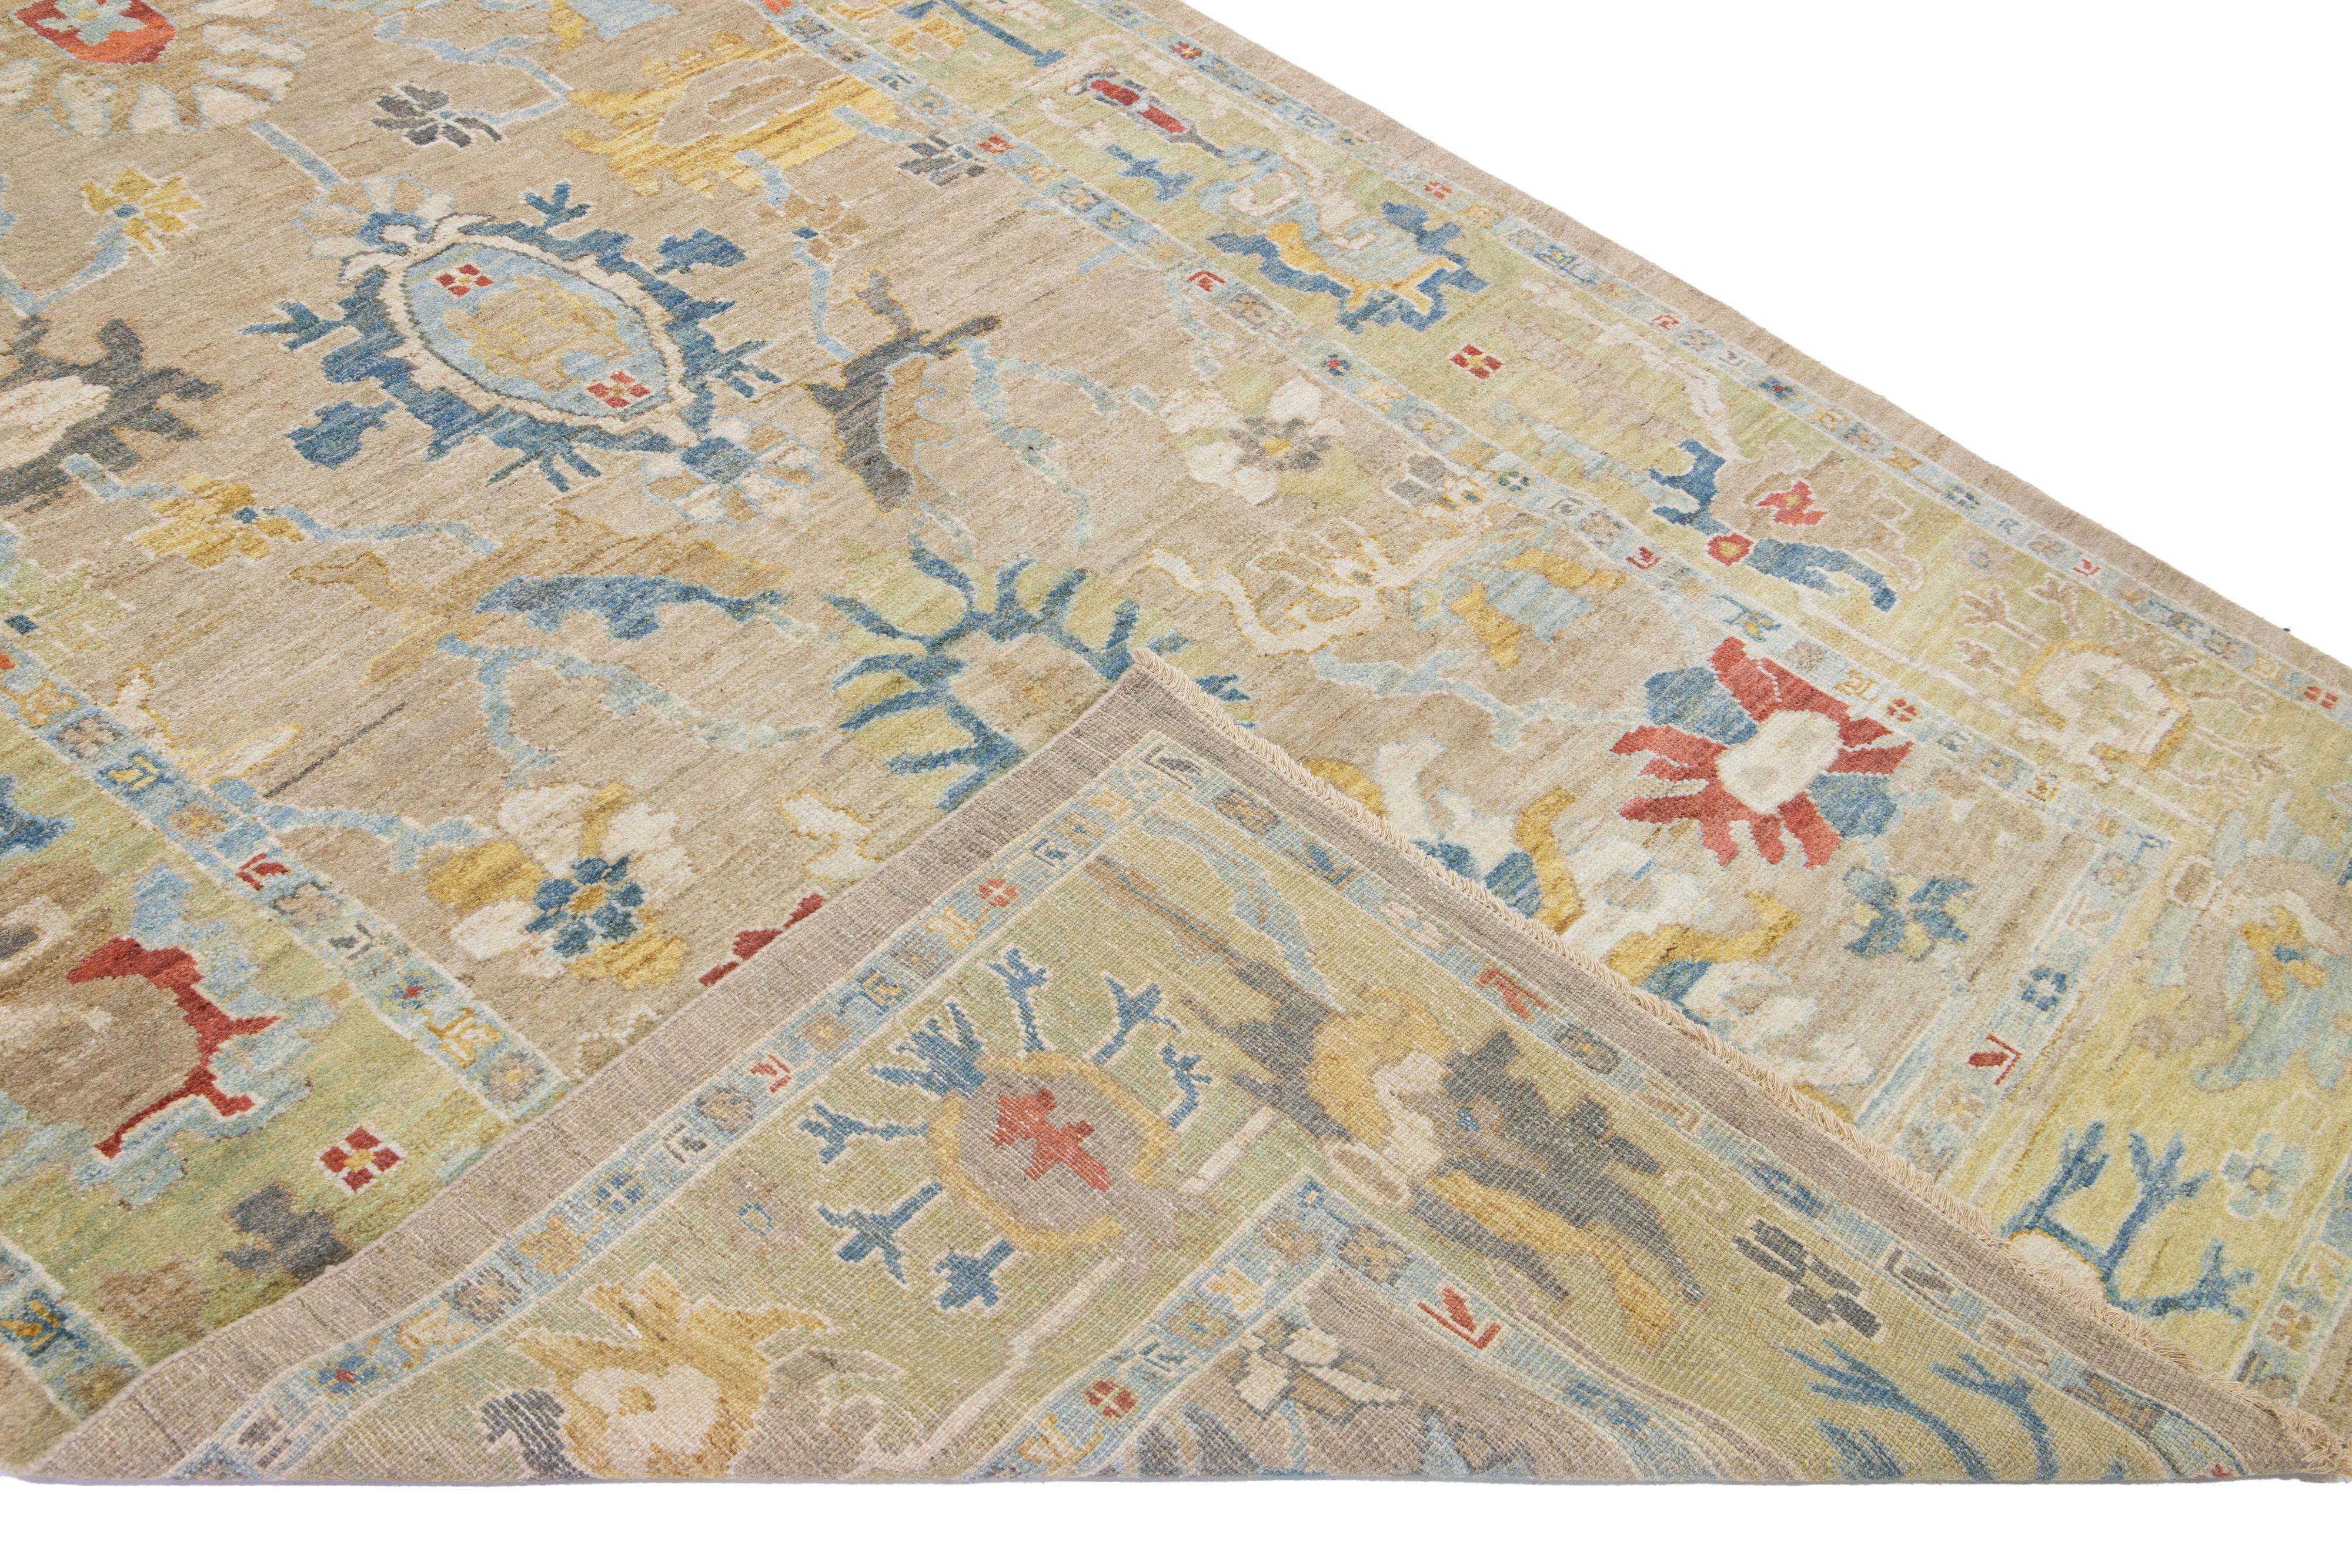 Modern Mahal hand-knotted wool runner with a brown field. This piece has a green-designed frame and multicolor accent colors that features a gorgeous all-over floral design.

This rug measures: 6'2